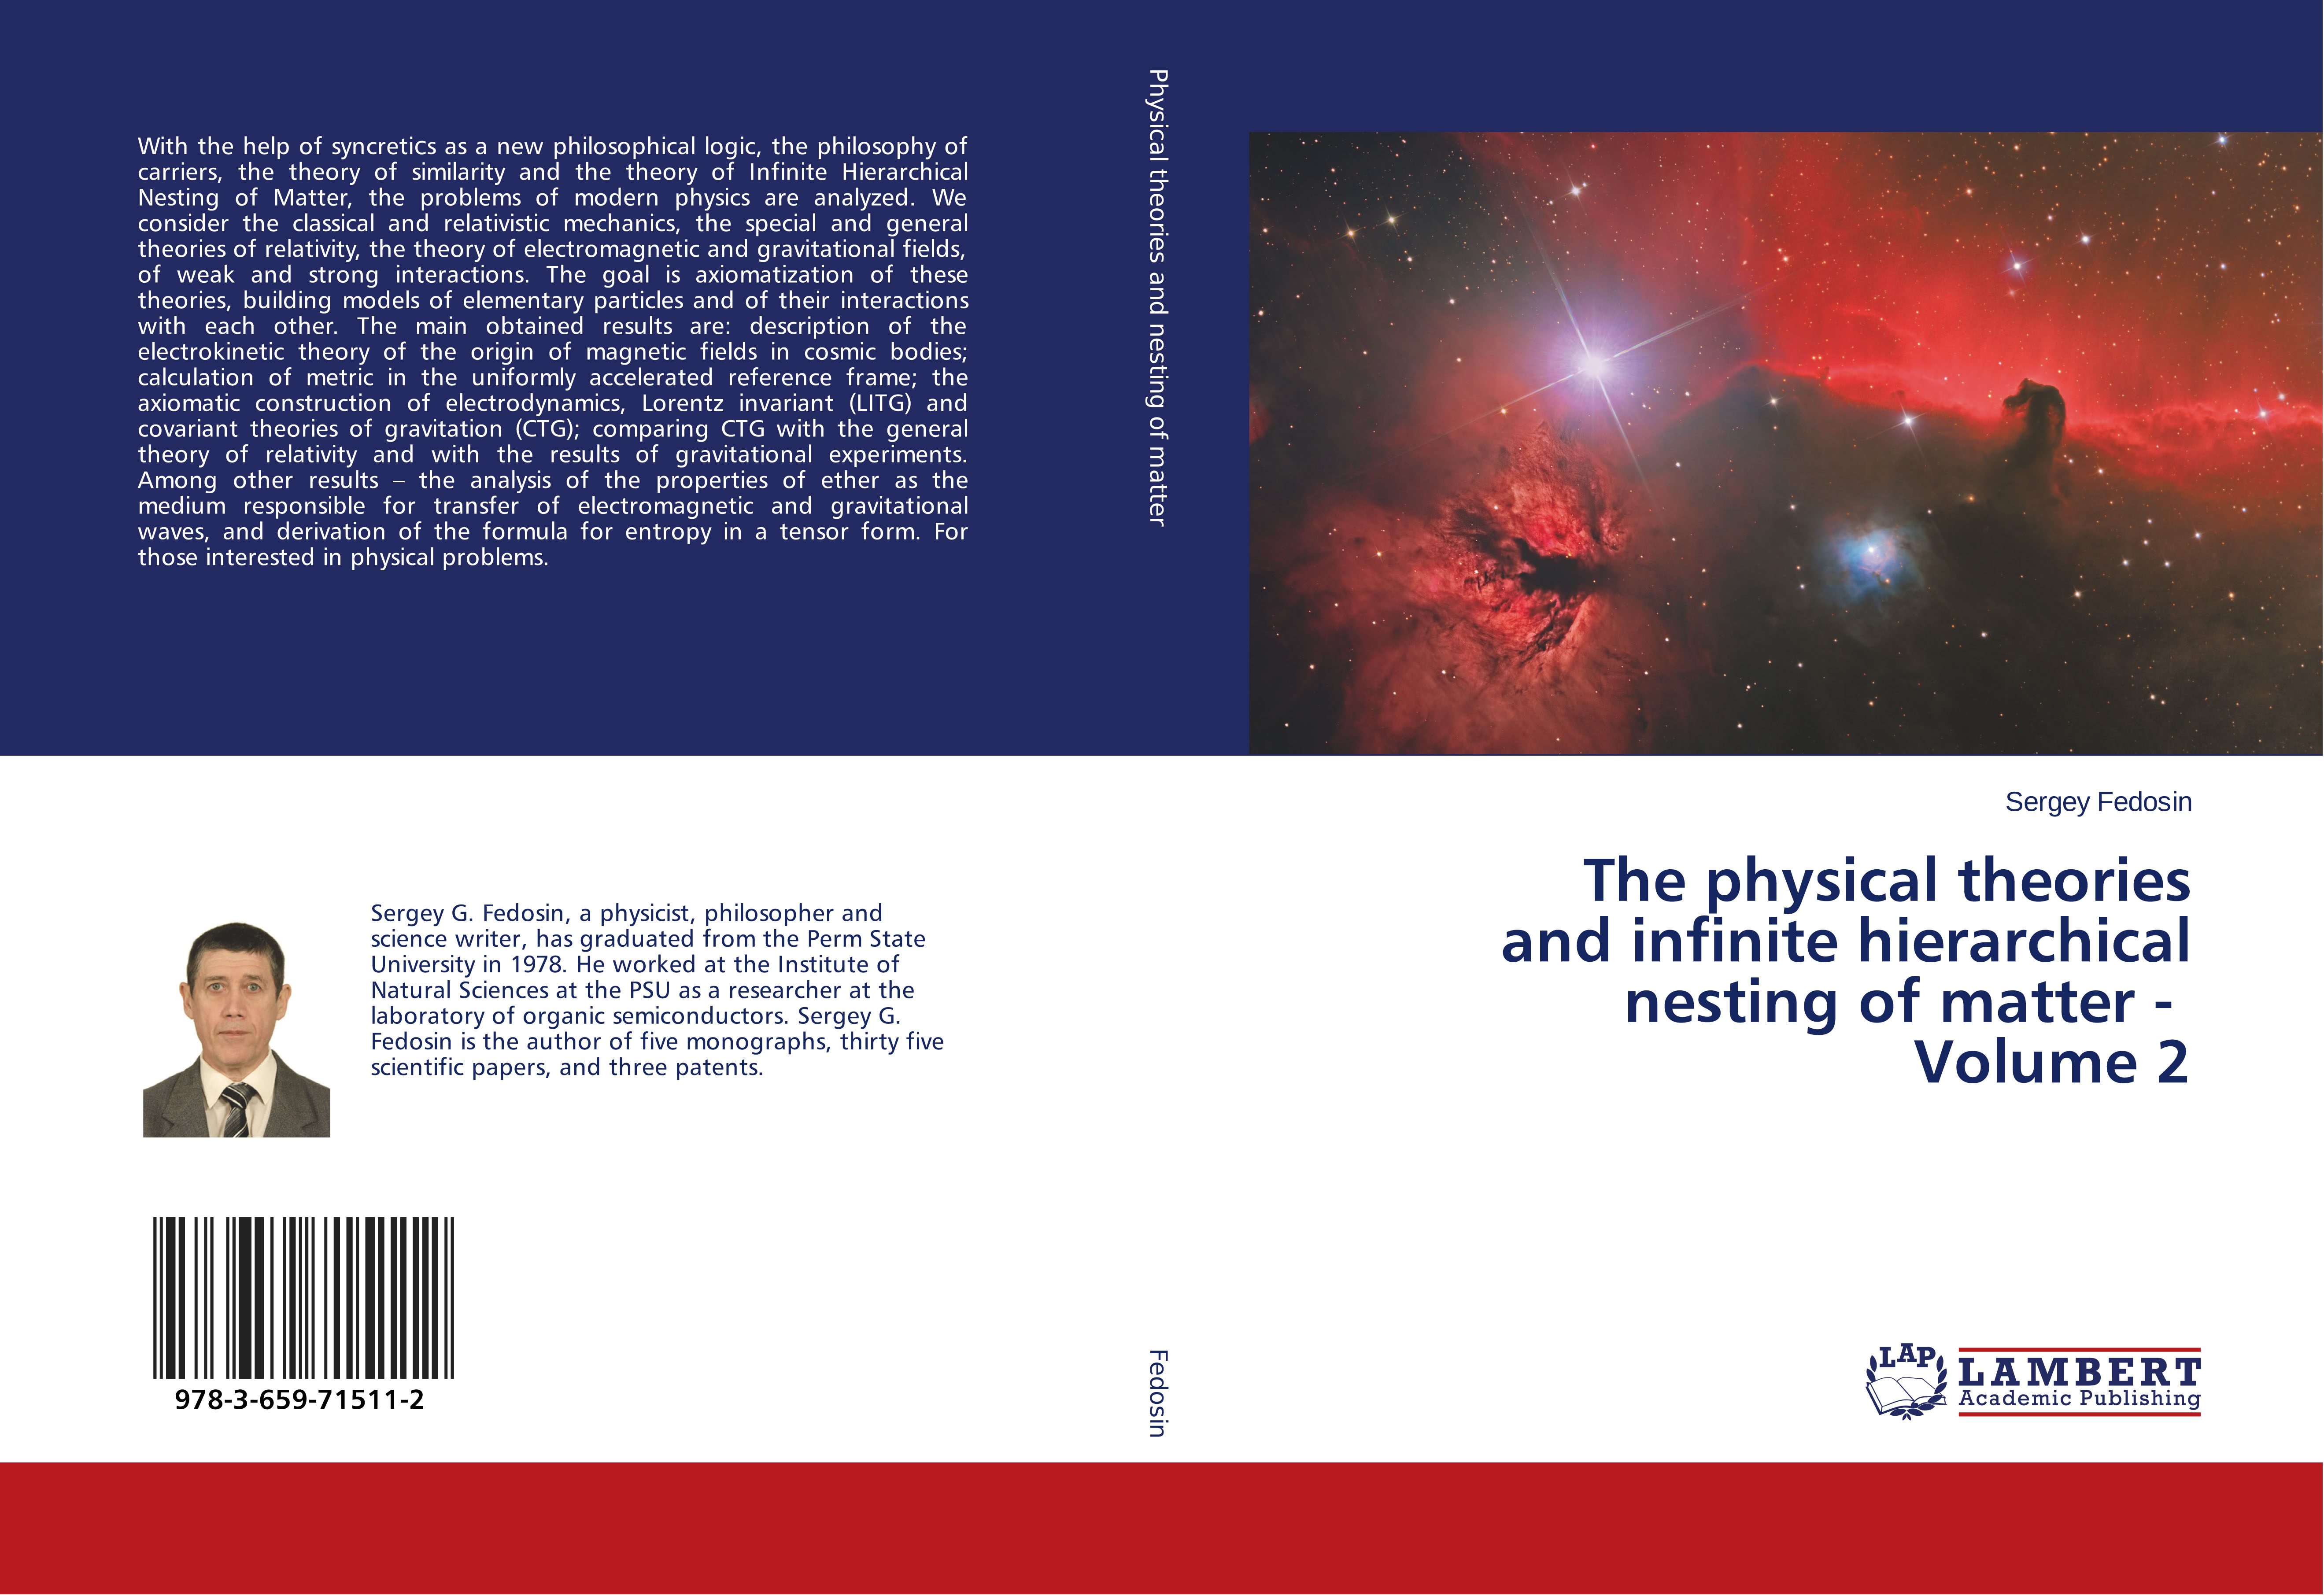 Book cover. The physical theories and infinite hierarchical nesting of matter, Volume 2. Sergey Fedosin